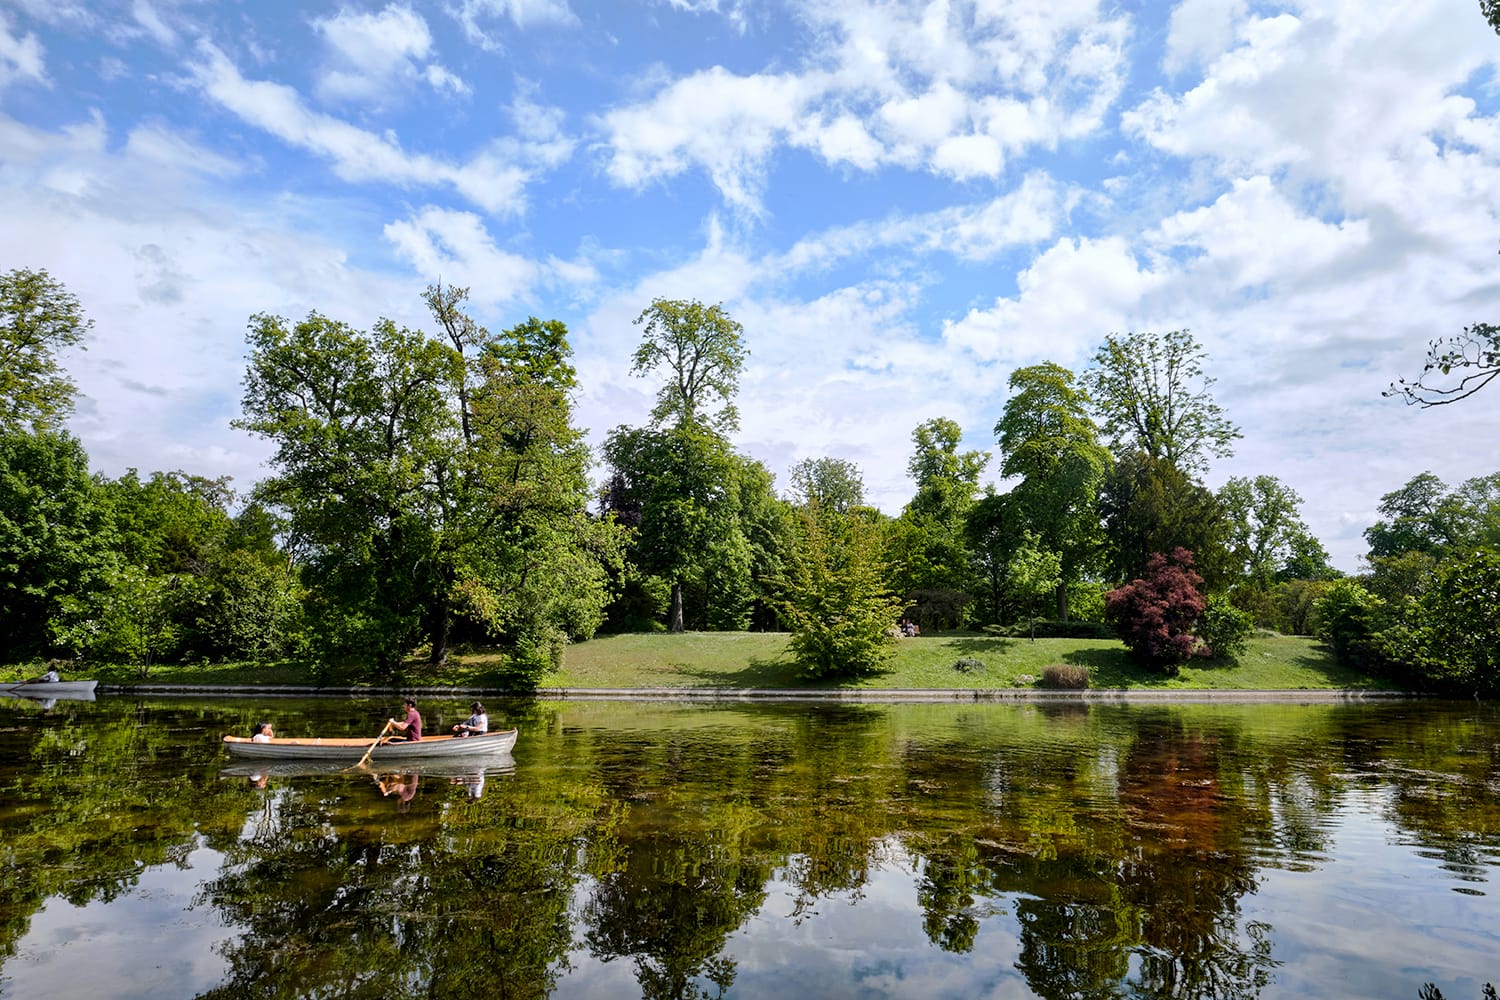 View of lower lake in the Bois de Boulogne in Paris, France